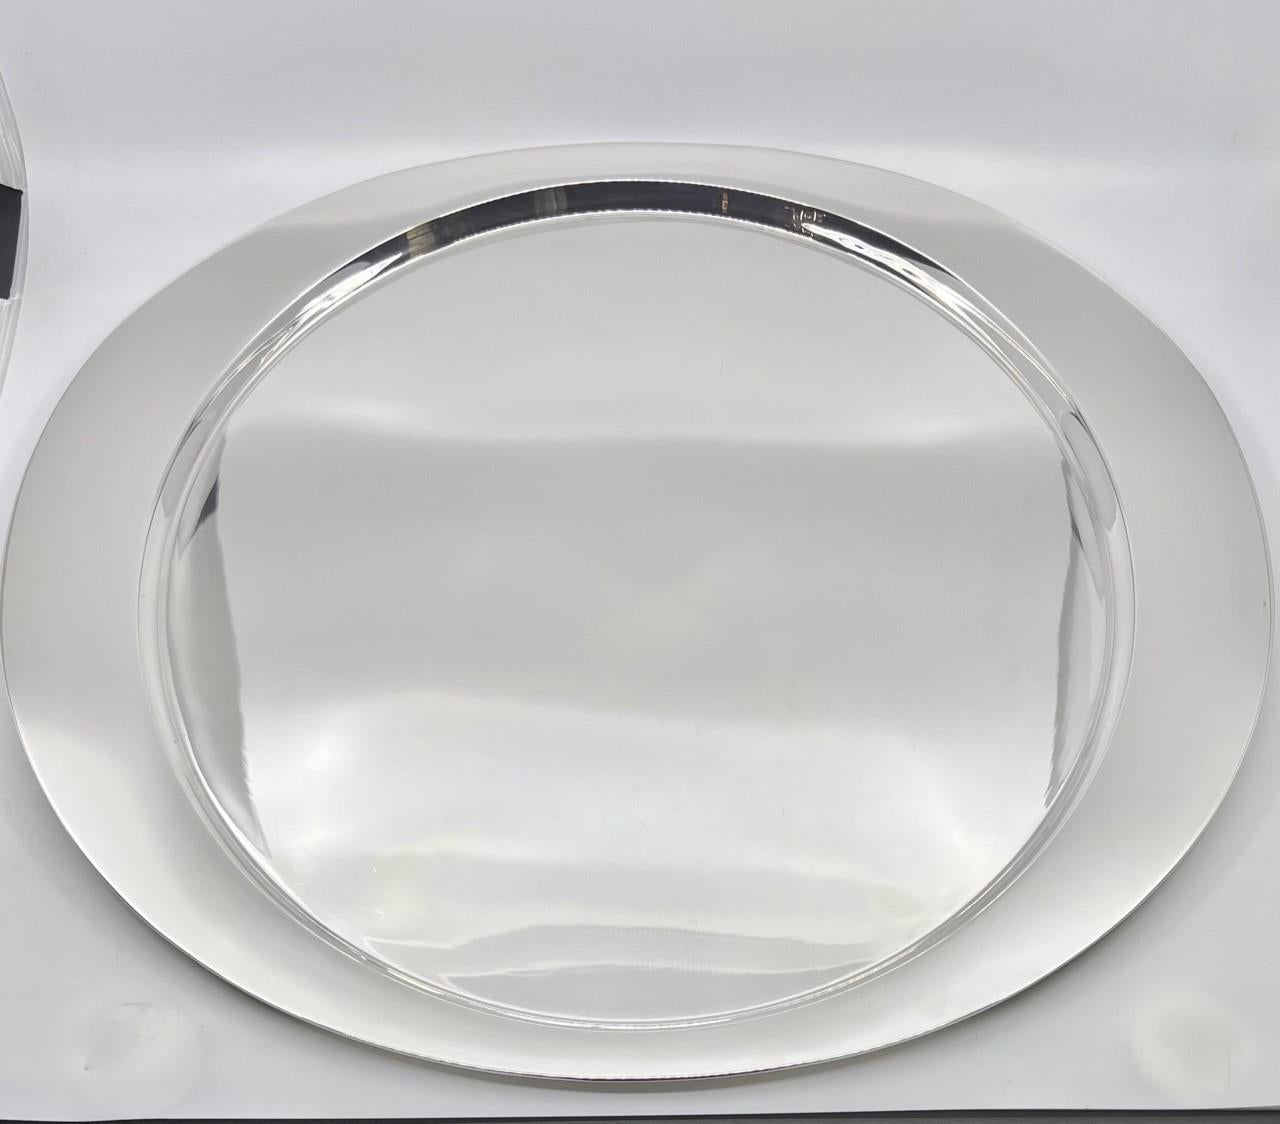 A large sterling silver Georg Jensen tray designed by Henning Koppel in 1952. A oval shaped tray with a round center. The oval edge is raised making the tray easy to lift and a very functional tray. An enormous amount of time go into making a tray